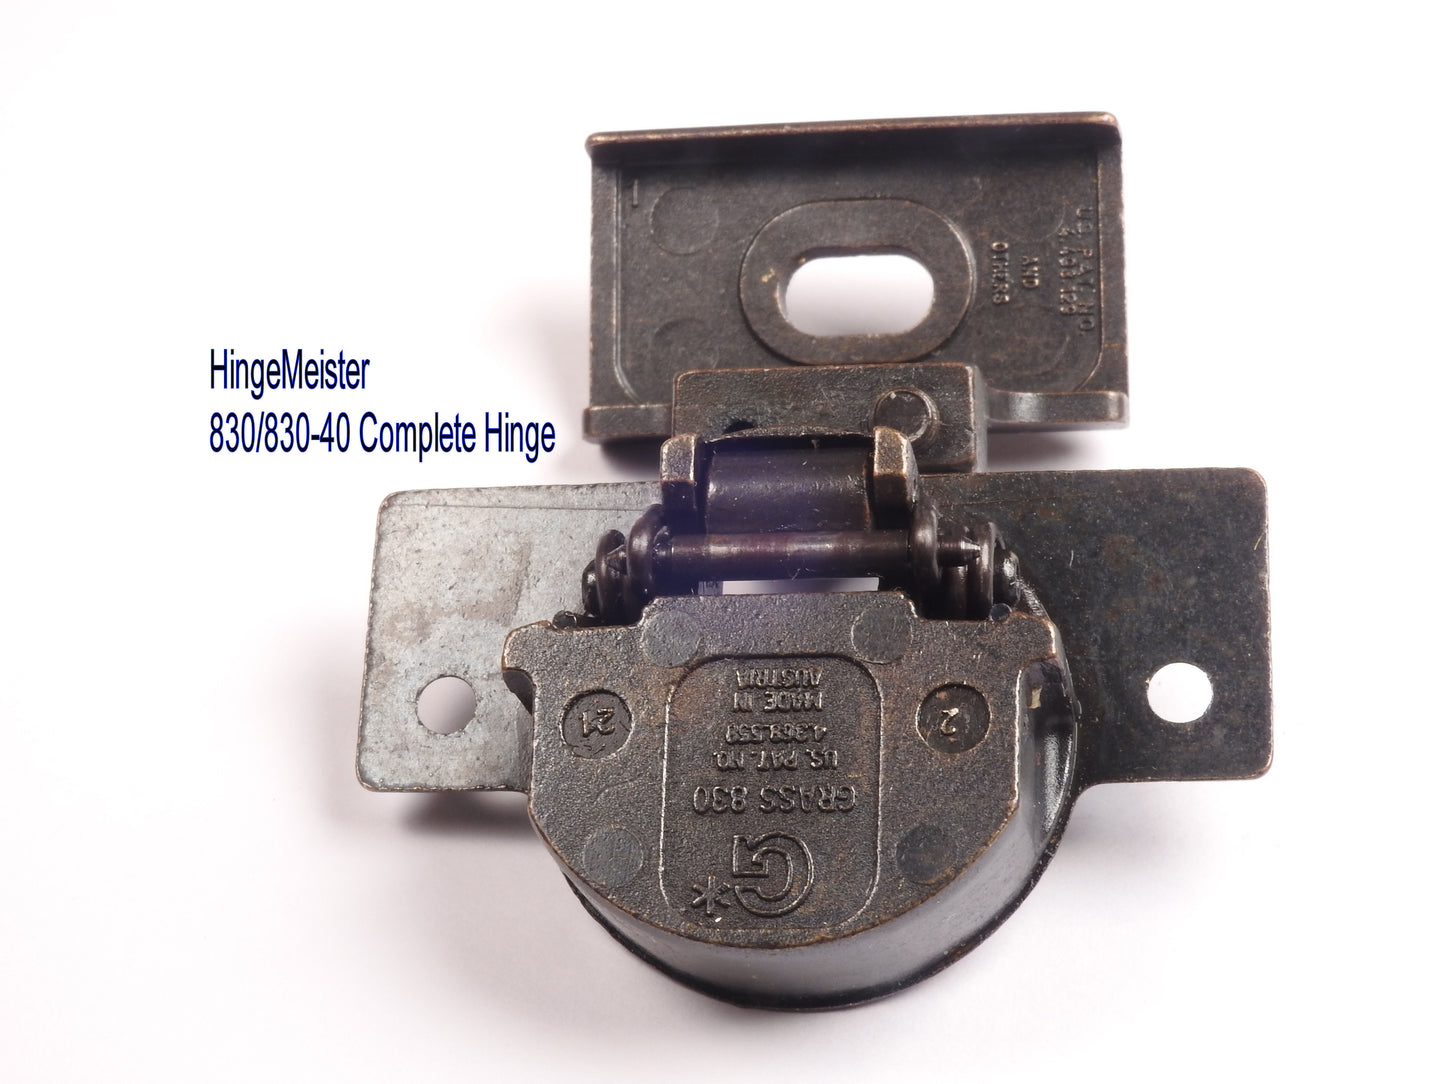 Grass 830-40 Bronze Hinge and mounting plate - Complete Hinge - Refurbished